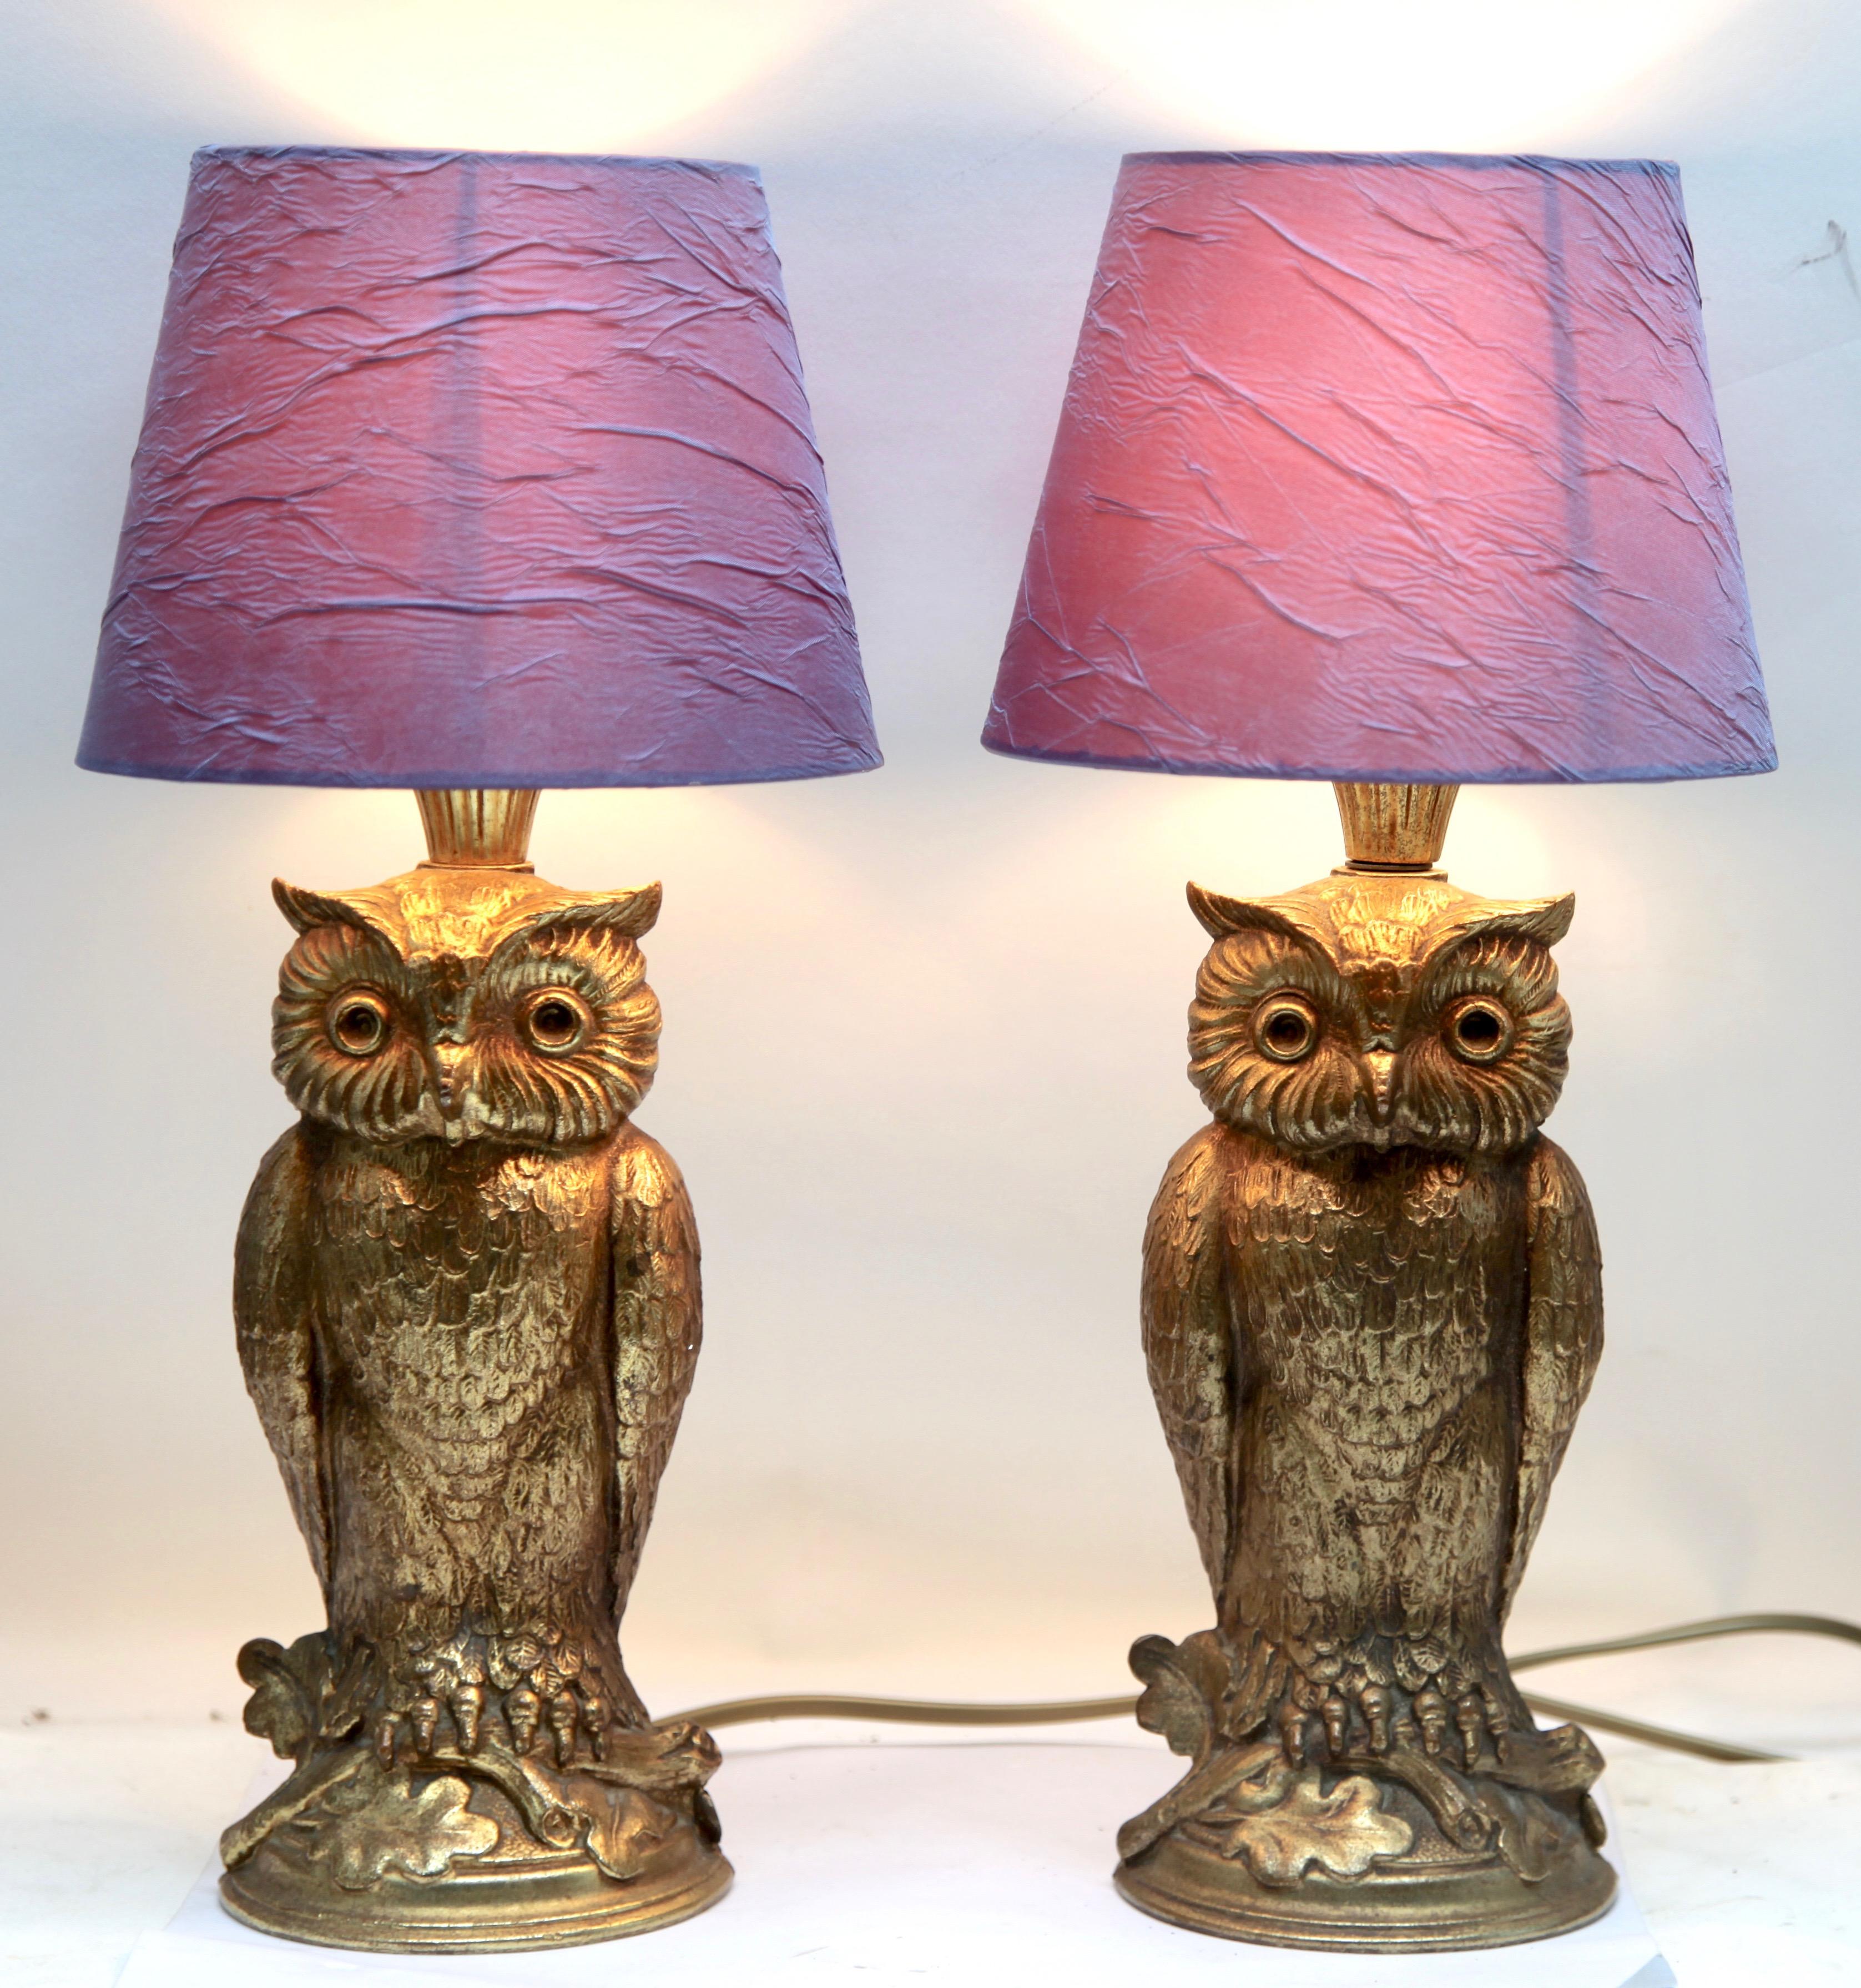 Charming sculptural brass owl lamp made by Loevsky & Loevsky and sold by Deknudt lighting company. Loevsky & Loevsky produced these table lamps from the 1960s until the 1970s. These owl lamps were sold by several companies around the world. In